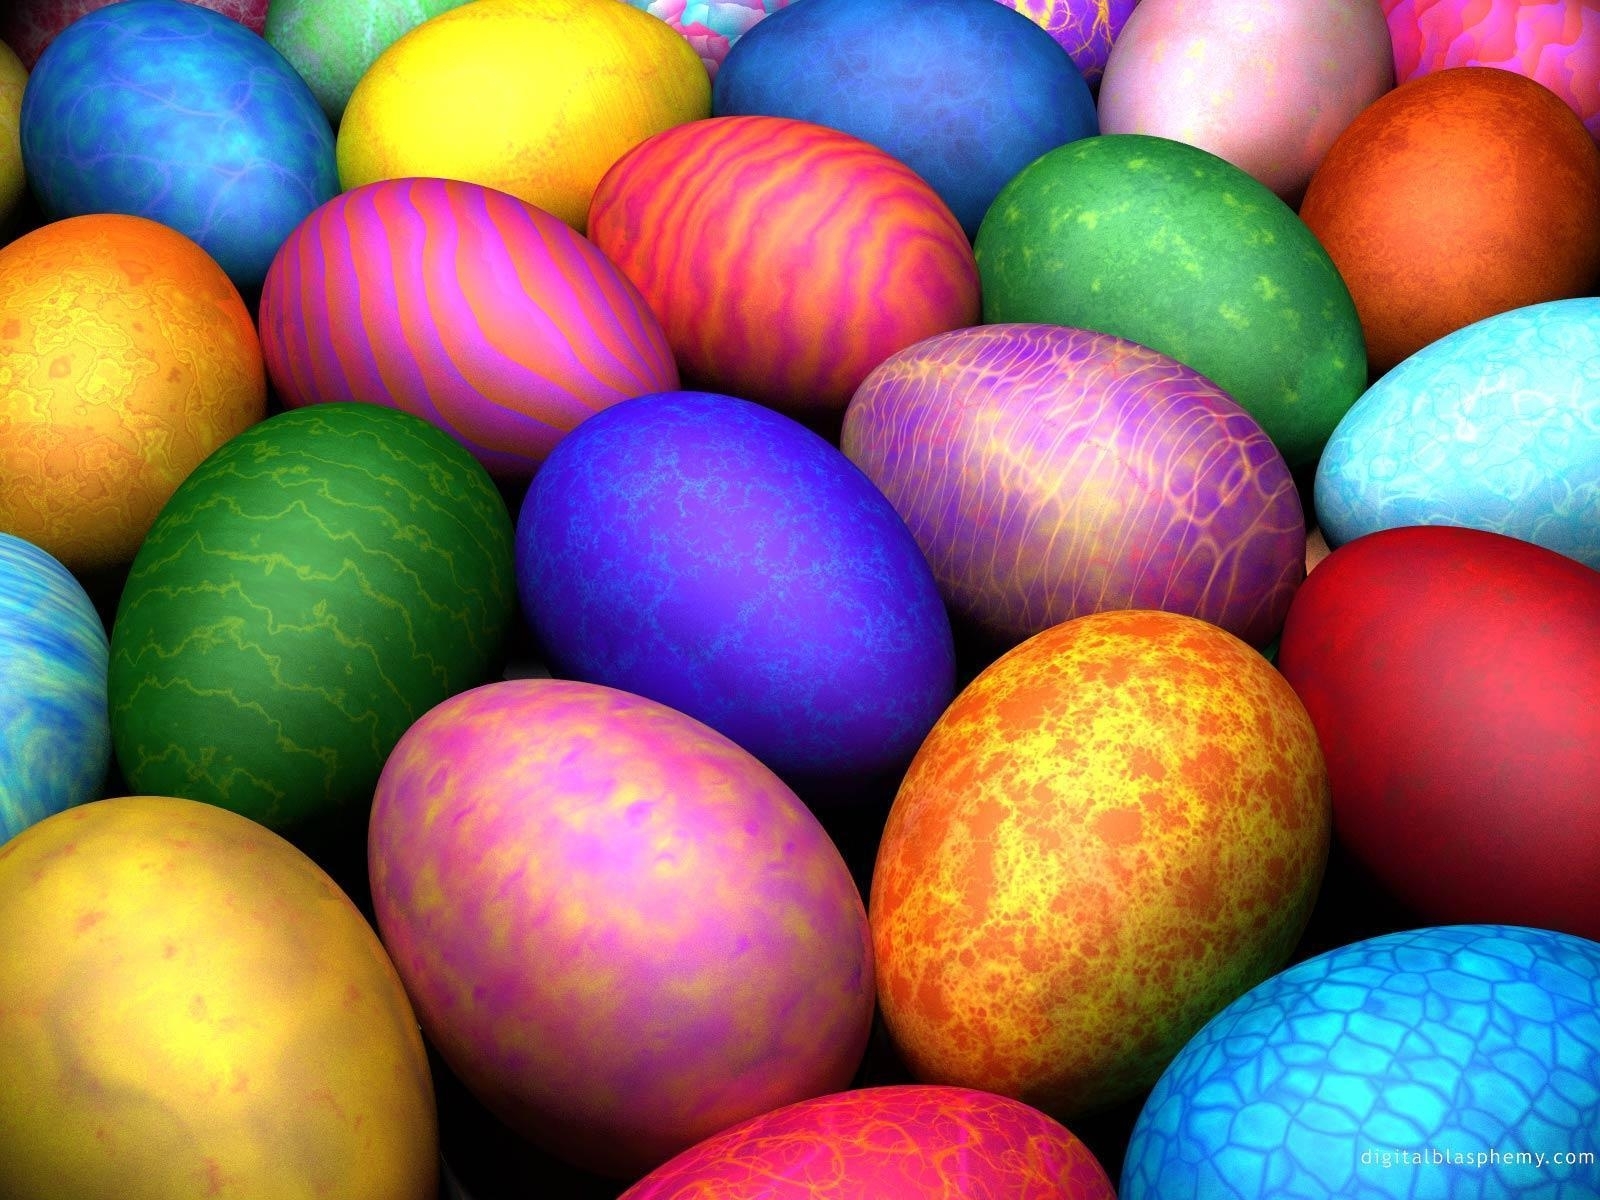 10 Top Free Easter Wallpaper For Computers FULL HD 1920×1080 For PC Background